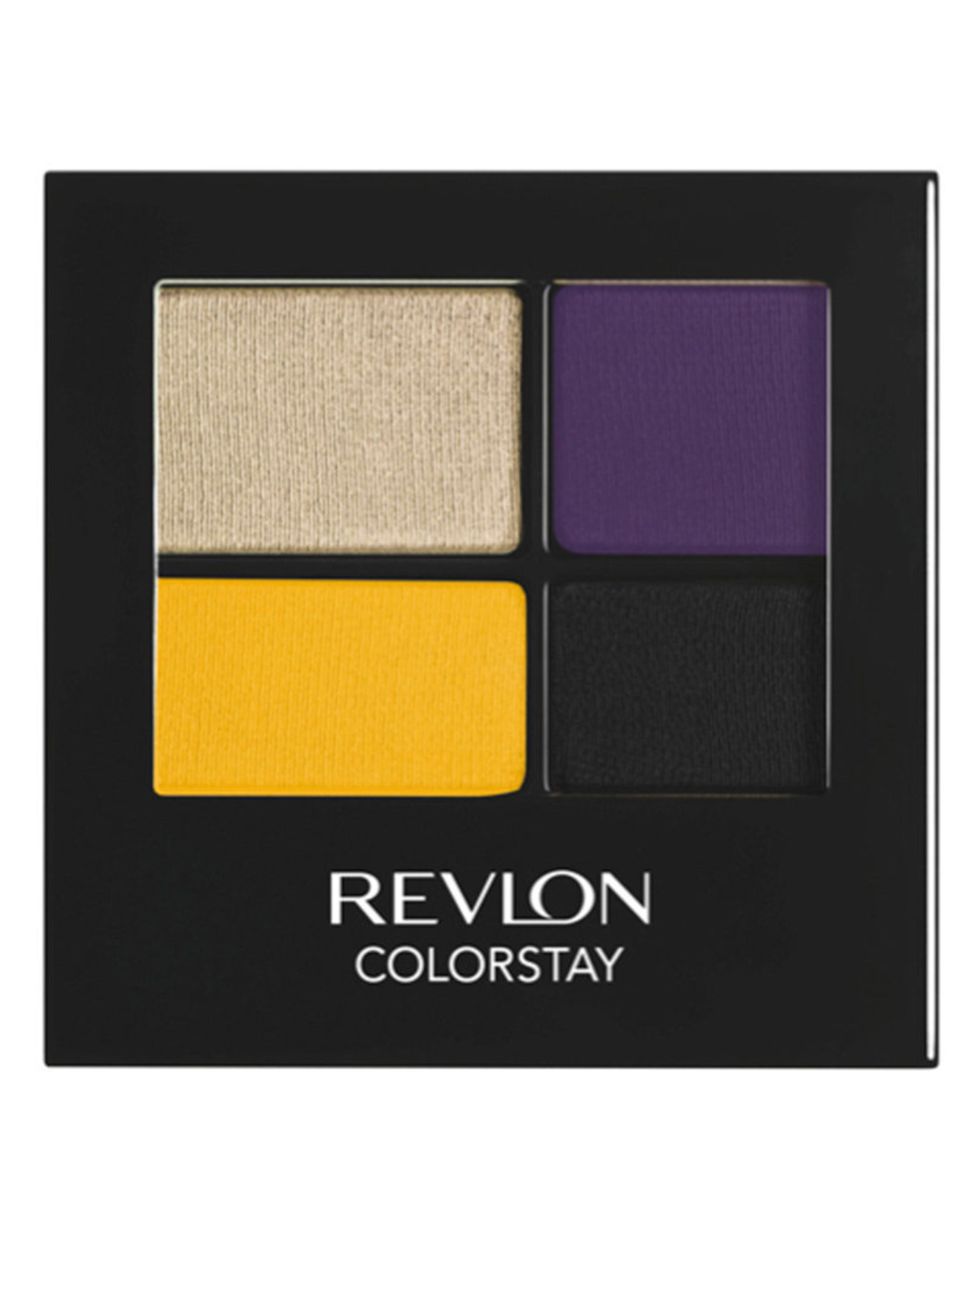 <p><a href="http://www.boots.com/en/Revlon-ColorStay-8482-16-Hour-Eyeshadow-Palette_1253786/">Revlon Colorstay 16hr Eyeshadow Quad in Exotic, £7.99</a></p><p>Brighten up your eyes with a pop of colour from Revlons S/S14 range. From deep purple and black 